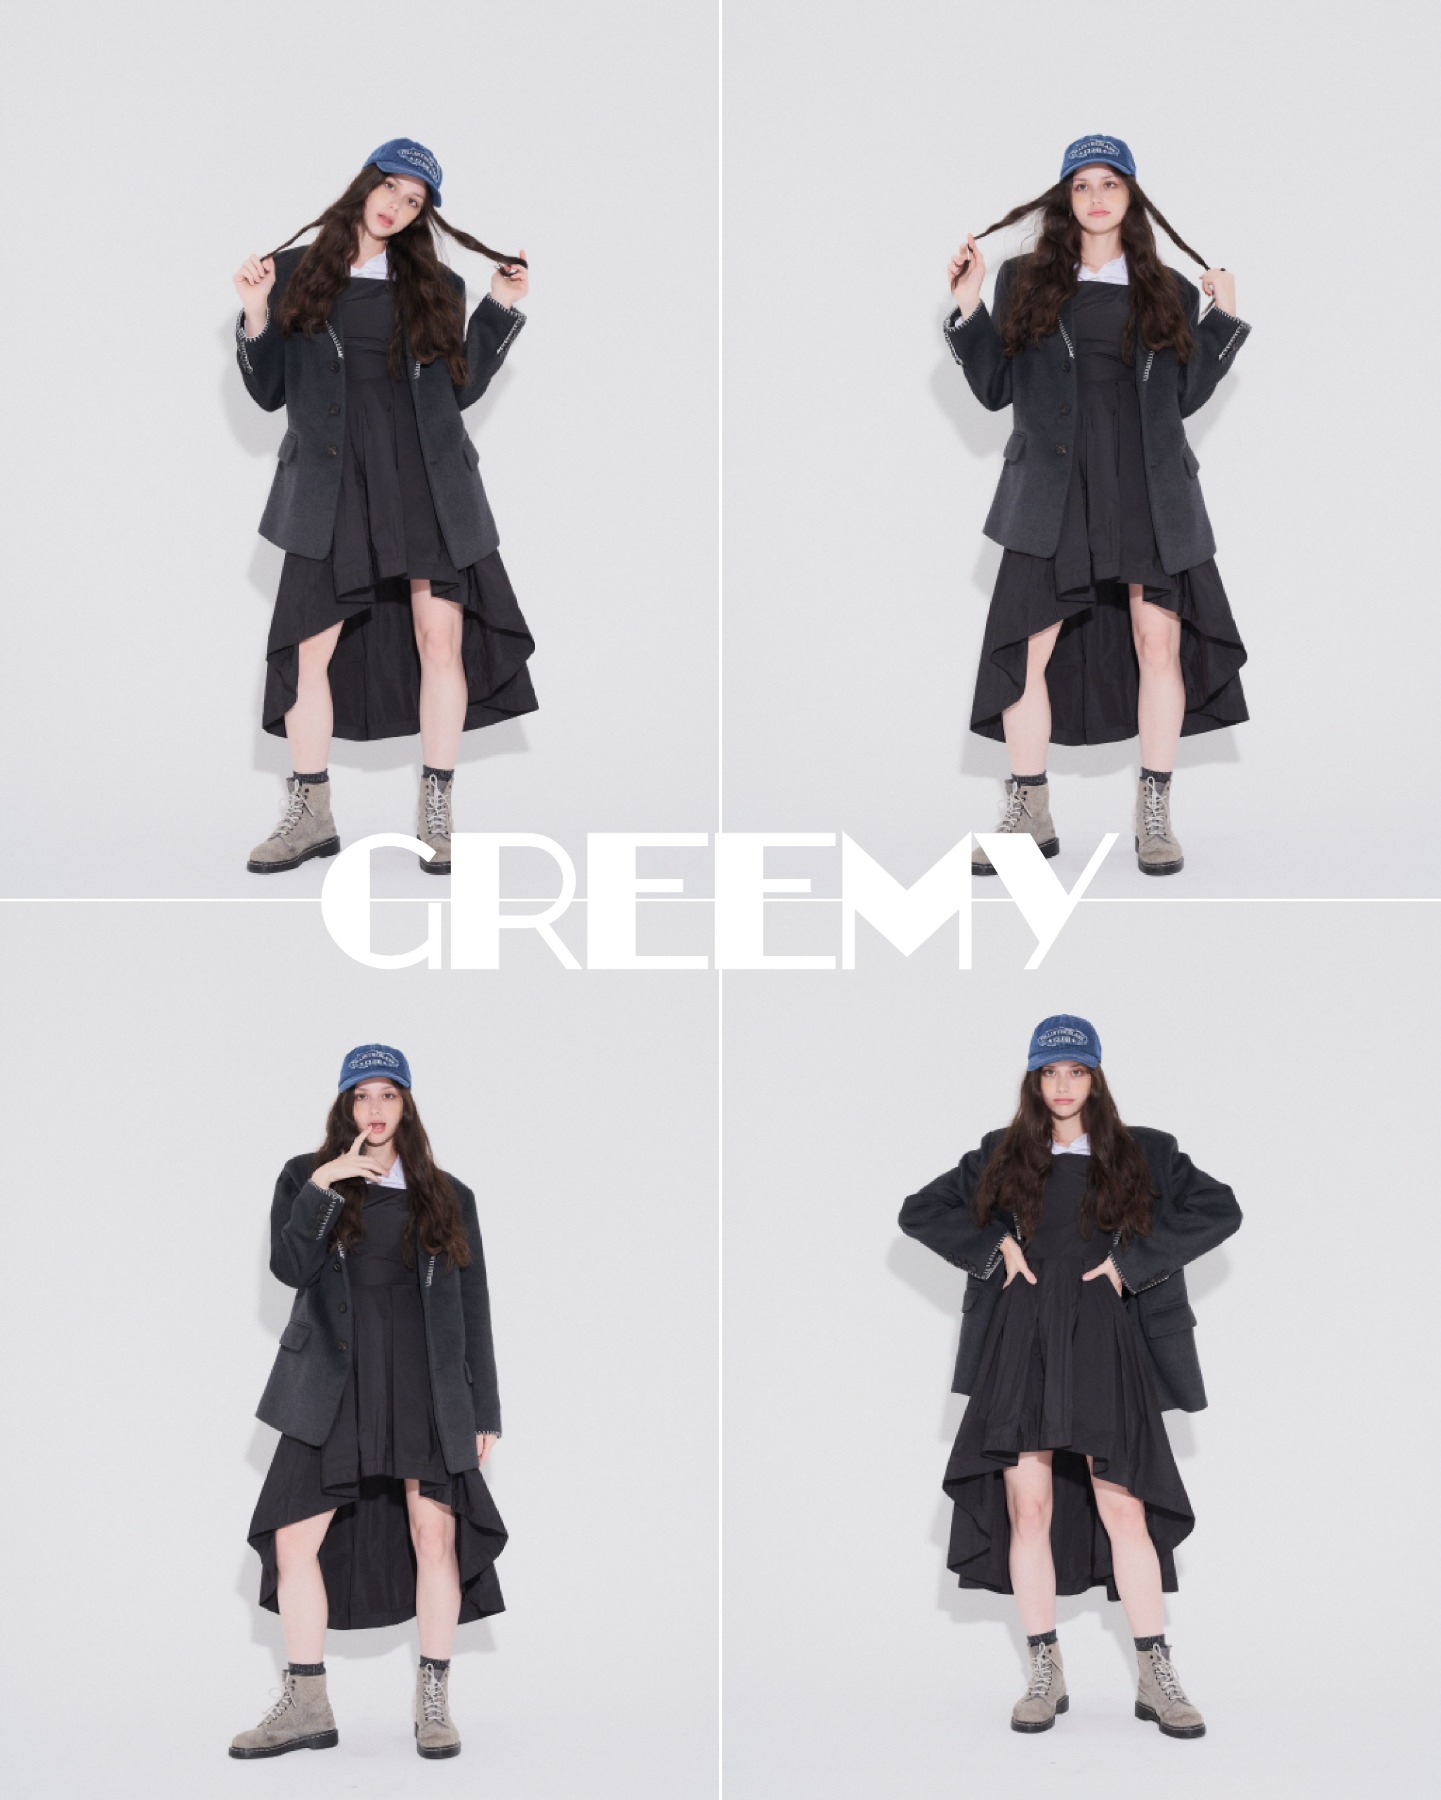 2022 GREEMY F/W Collection part 2